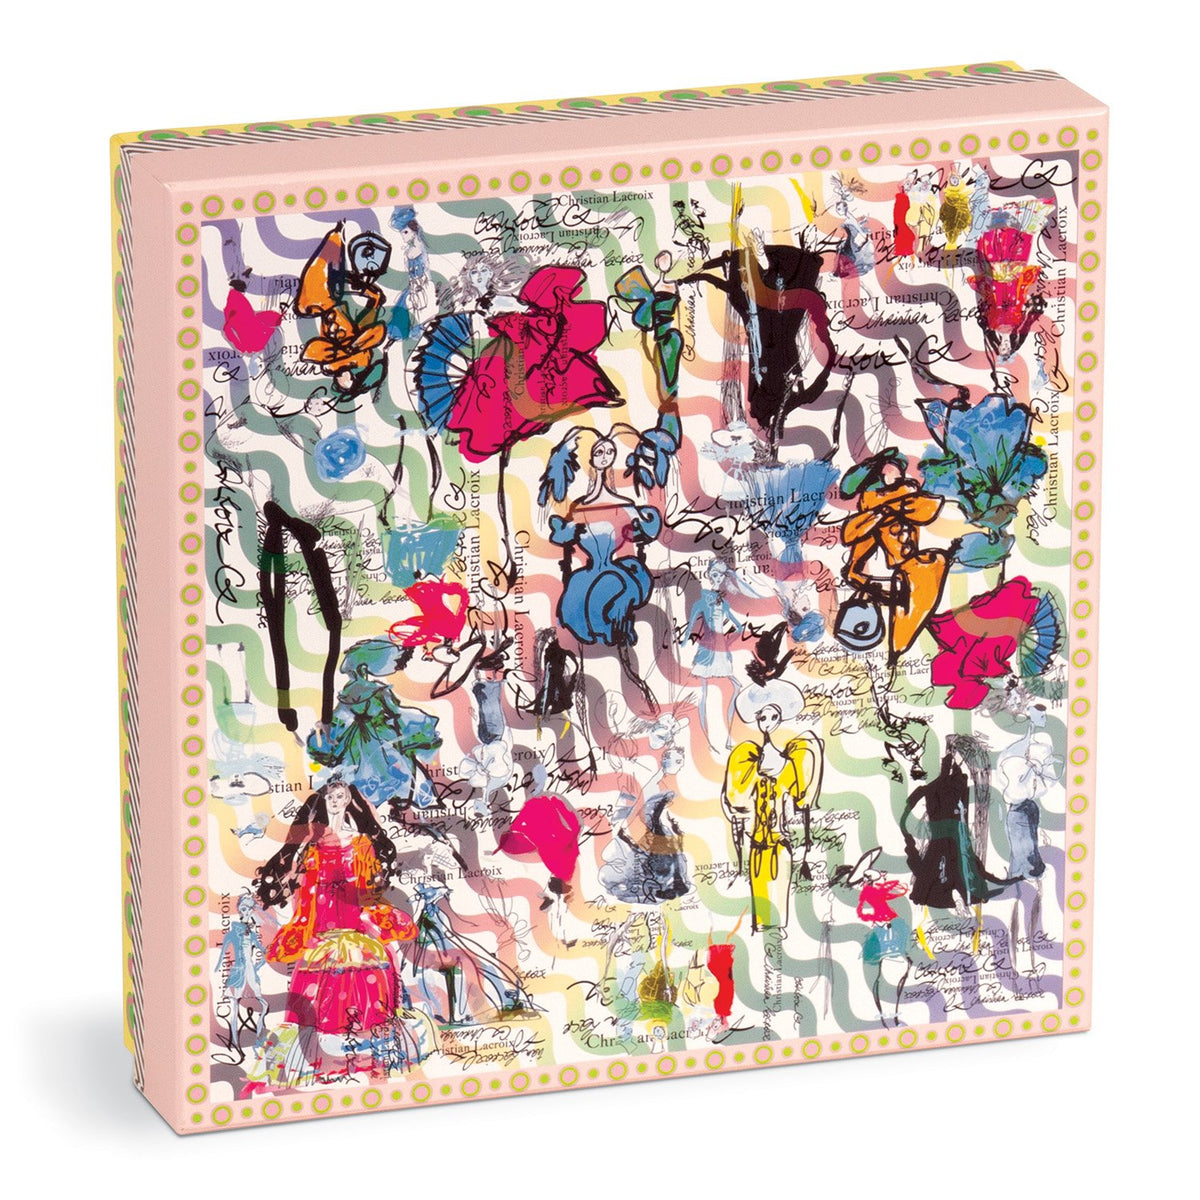 Christian Lacroix Heritage Collection Ipanema Girls 500 Piece Double-Sided Puzzle 500 Piece Puzzles Christian Lacroix 